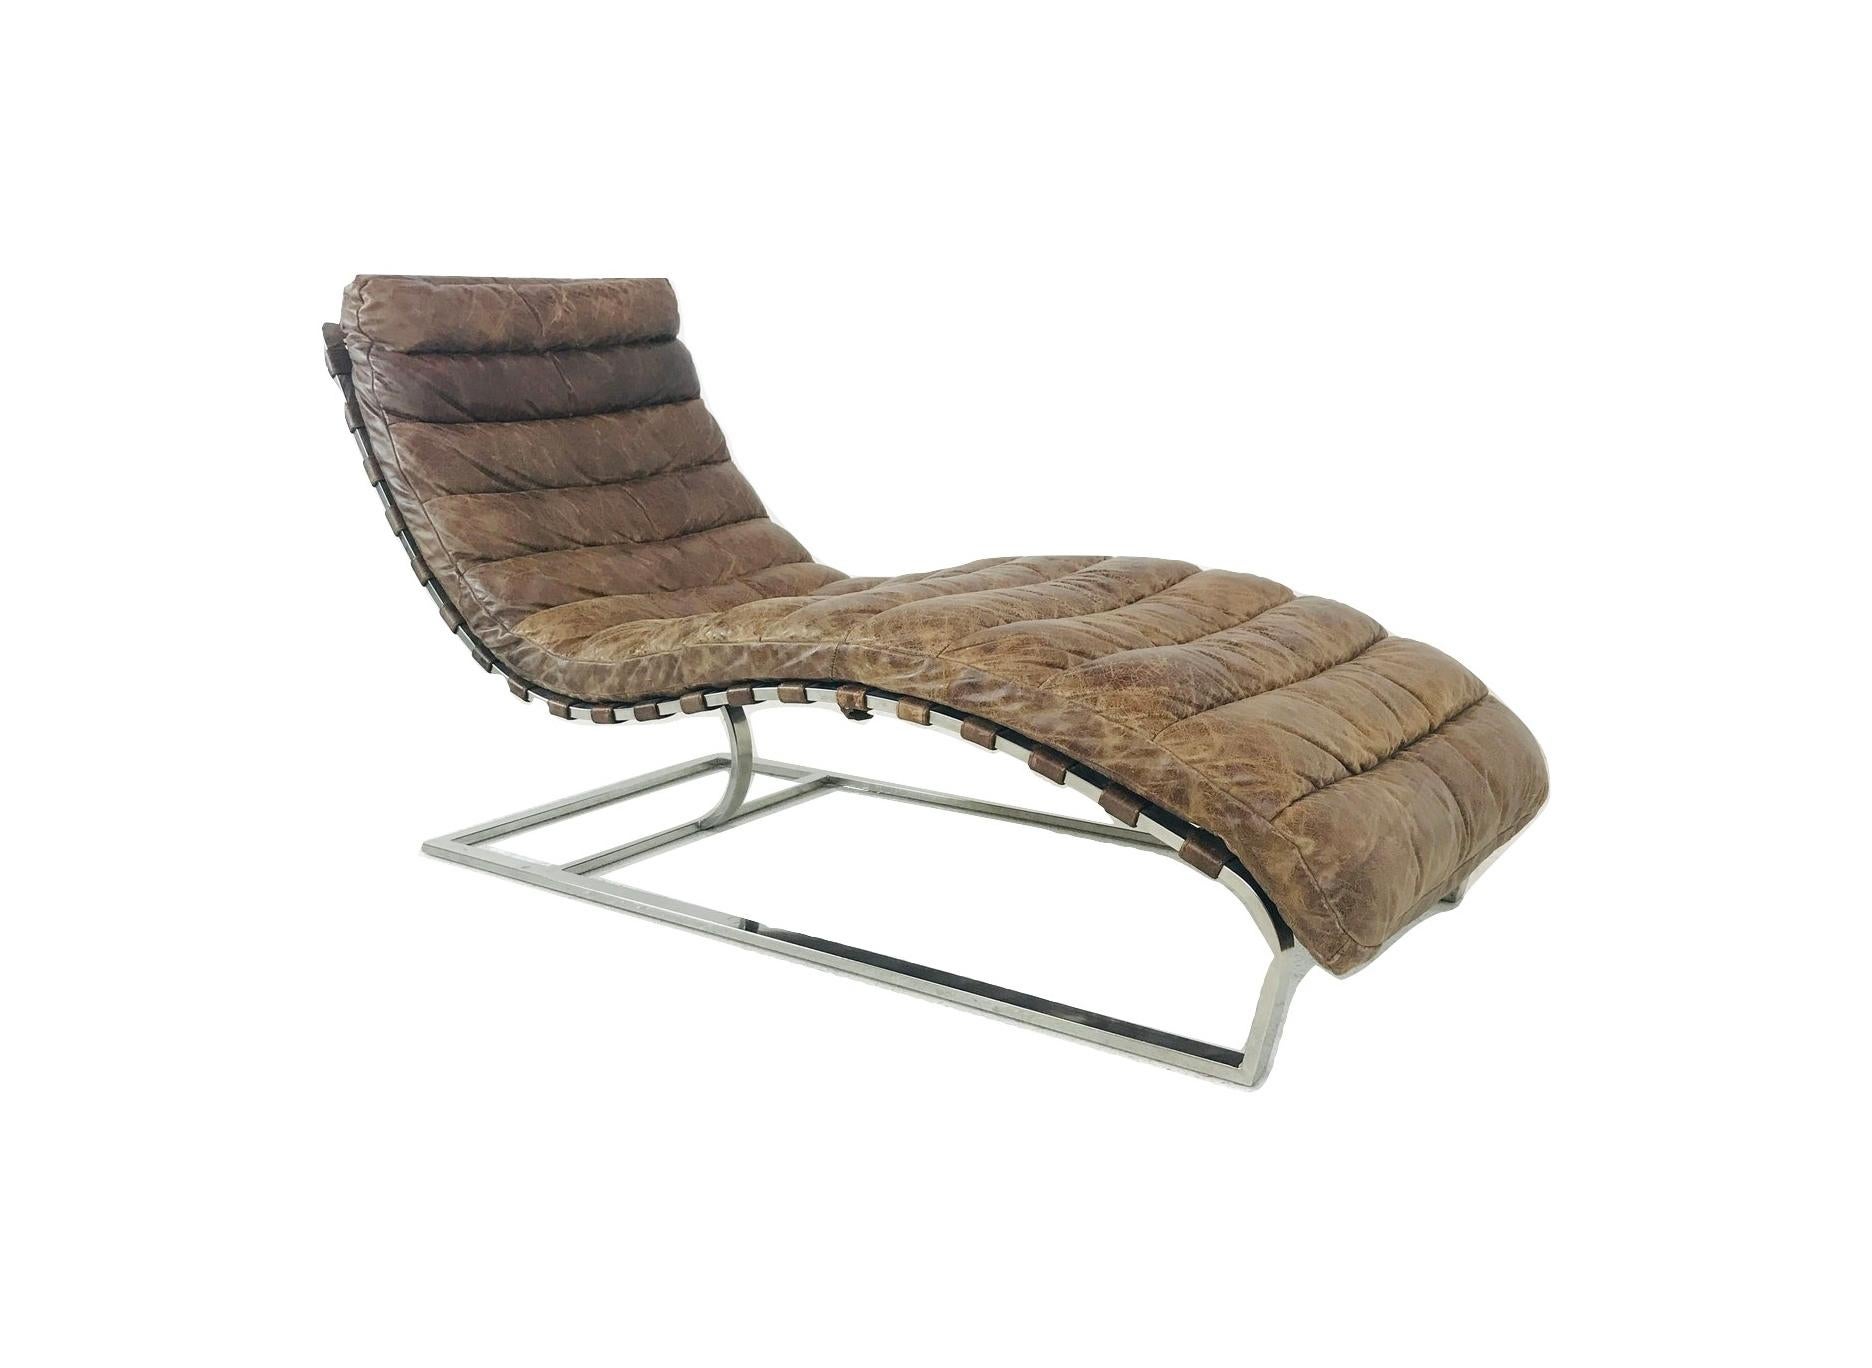 This stylish modern chaise lounge chair features channeled brown leather with a distressed patina situated on a chrome base. Comfortable lounge design makes this an excellent seating option for home or office. 